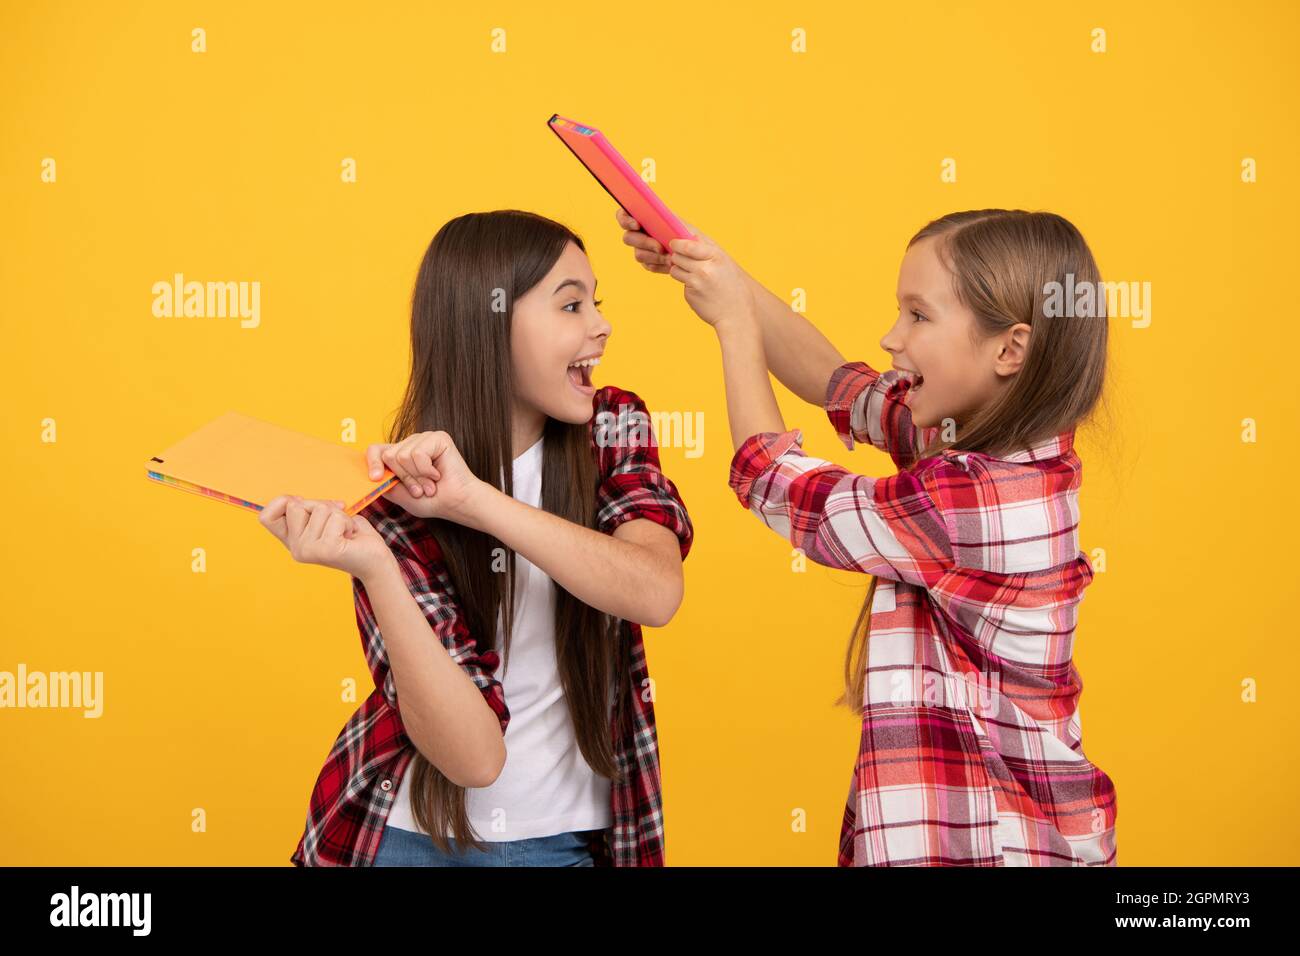 teens ready to study. happy childhood. cheerful kids going to do homework with books. Stock Photo